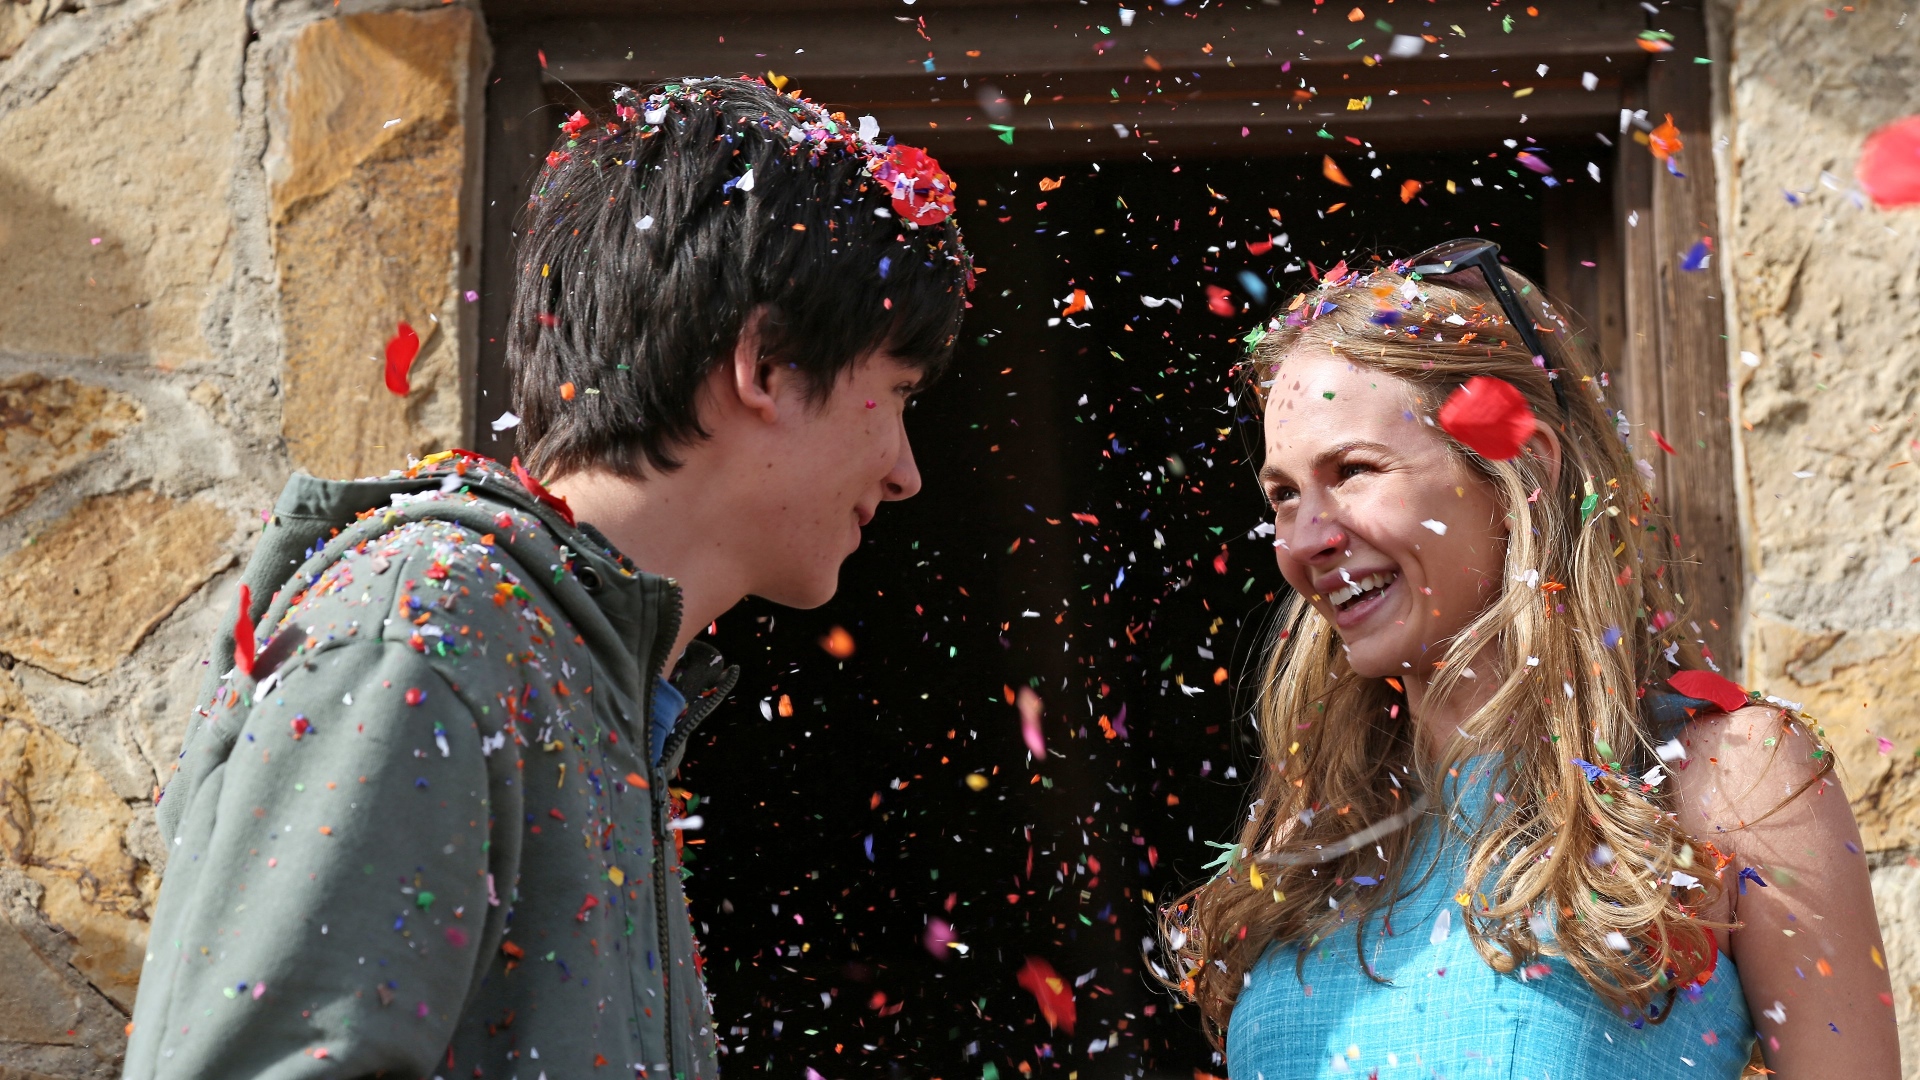 movie, the space between us, asa butterfield, brittany robertson